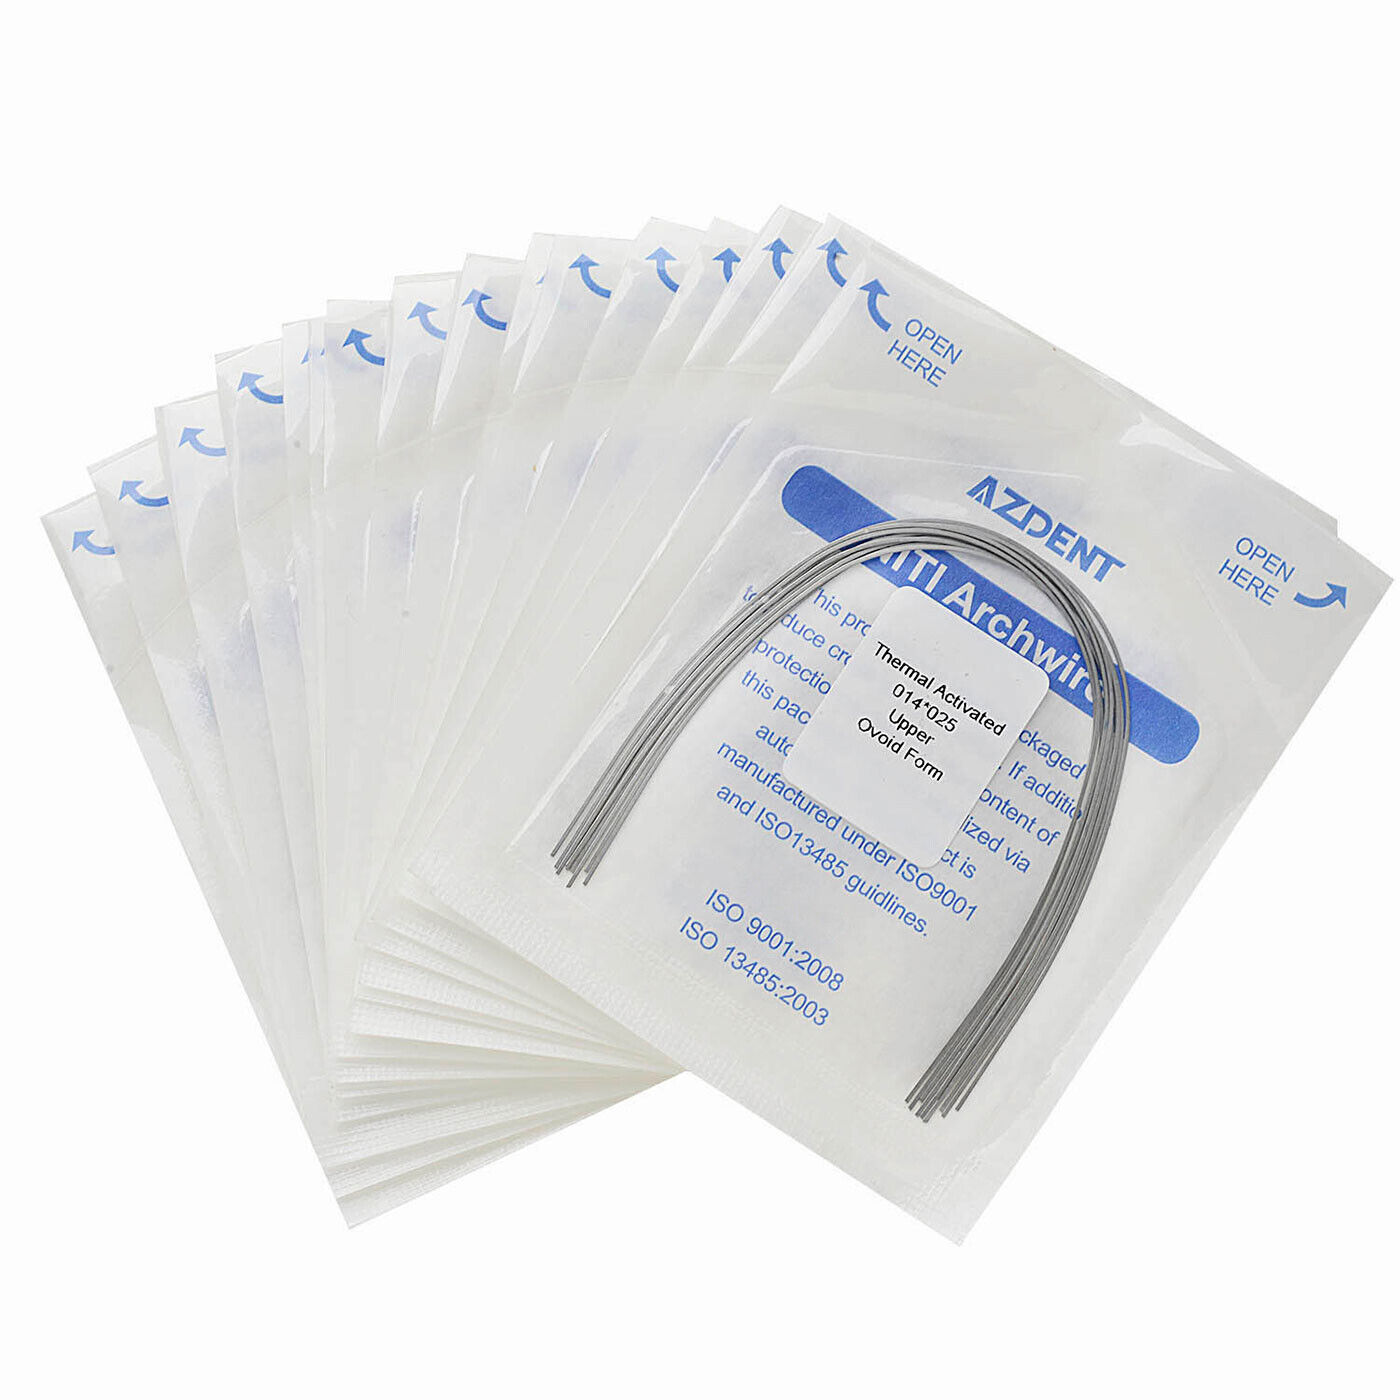 AZDENT Dental Orthodontic Heat Thermal Activated Niti Rectangular Arch Wires